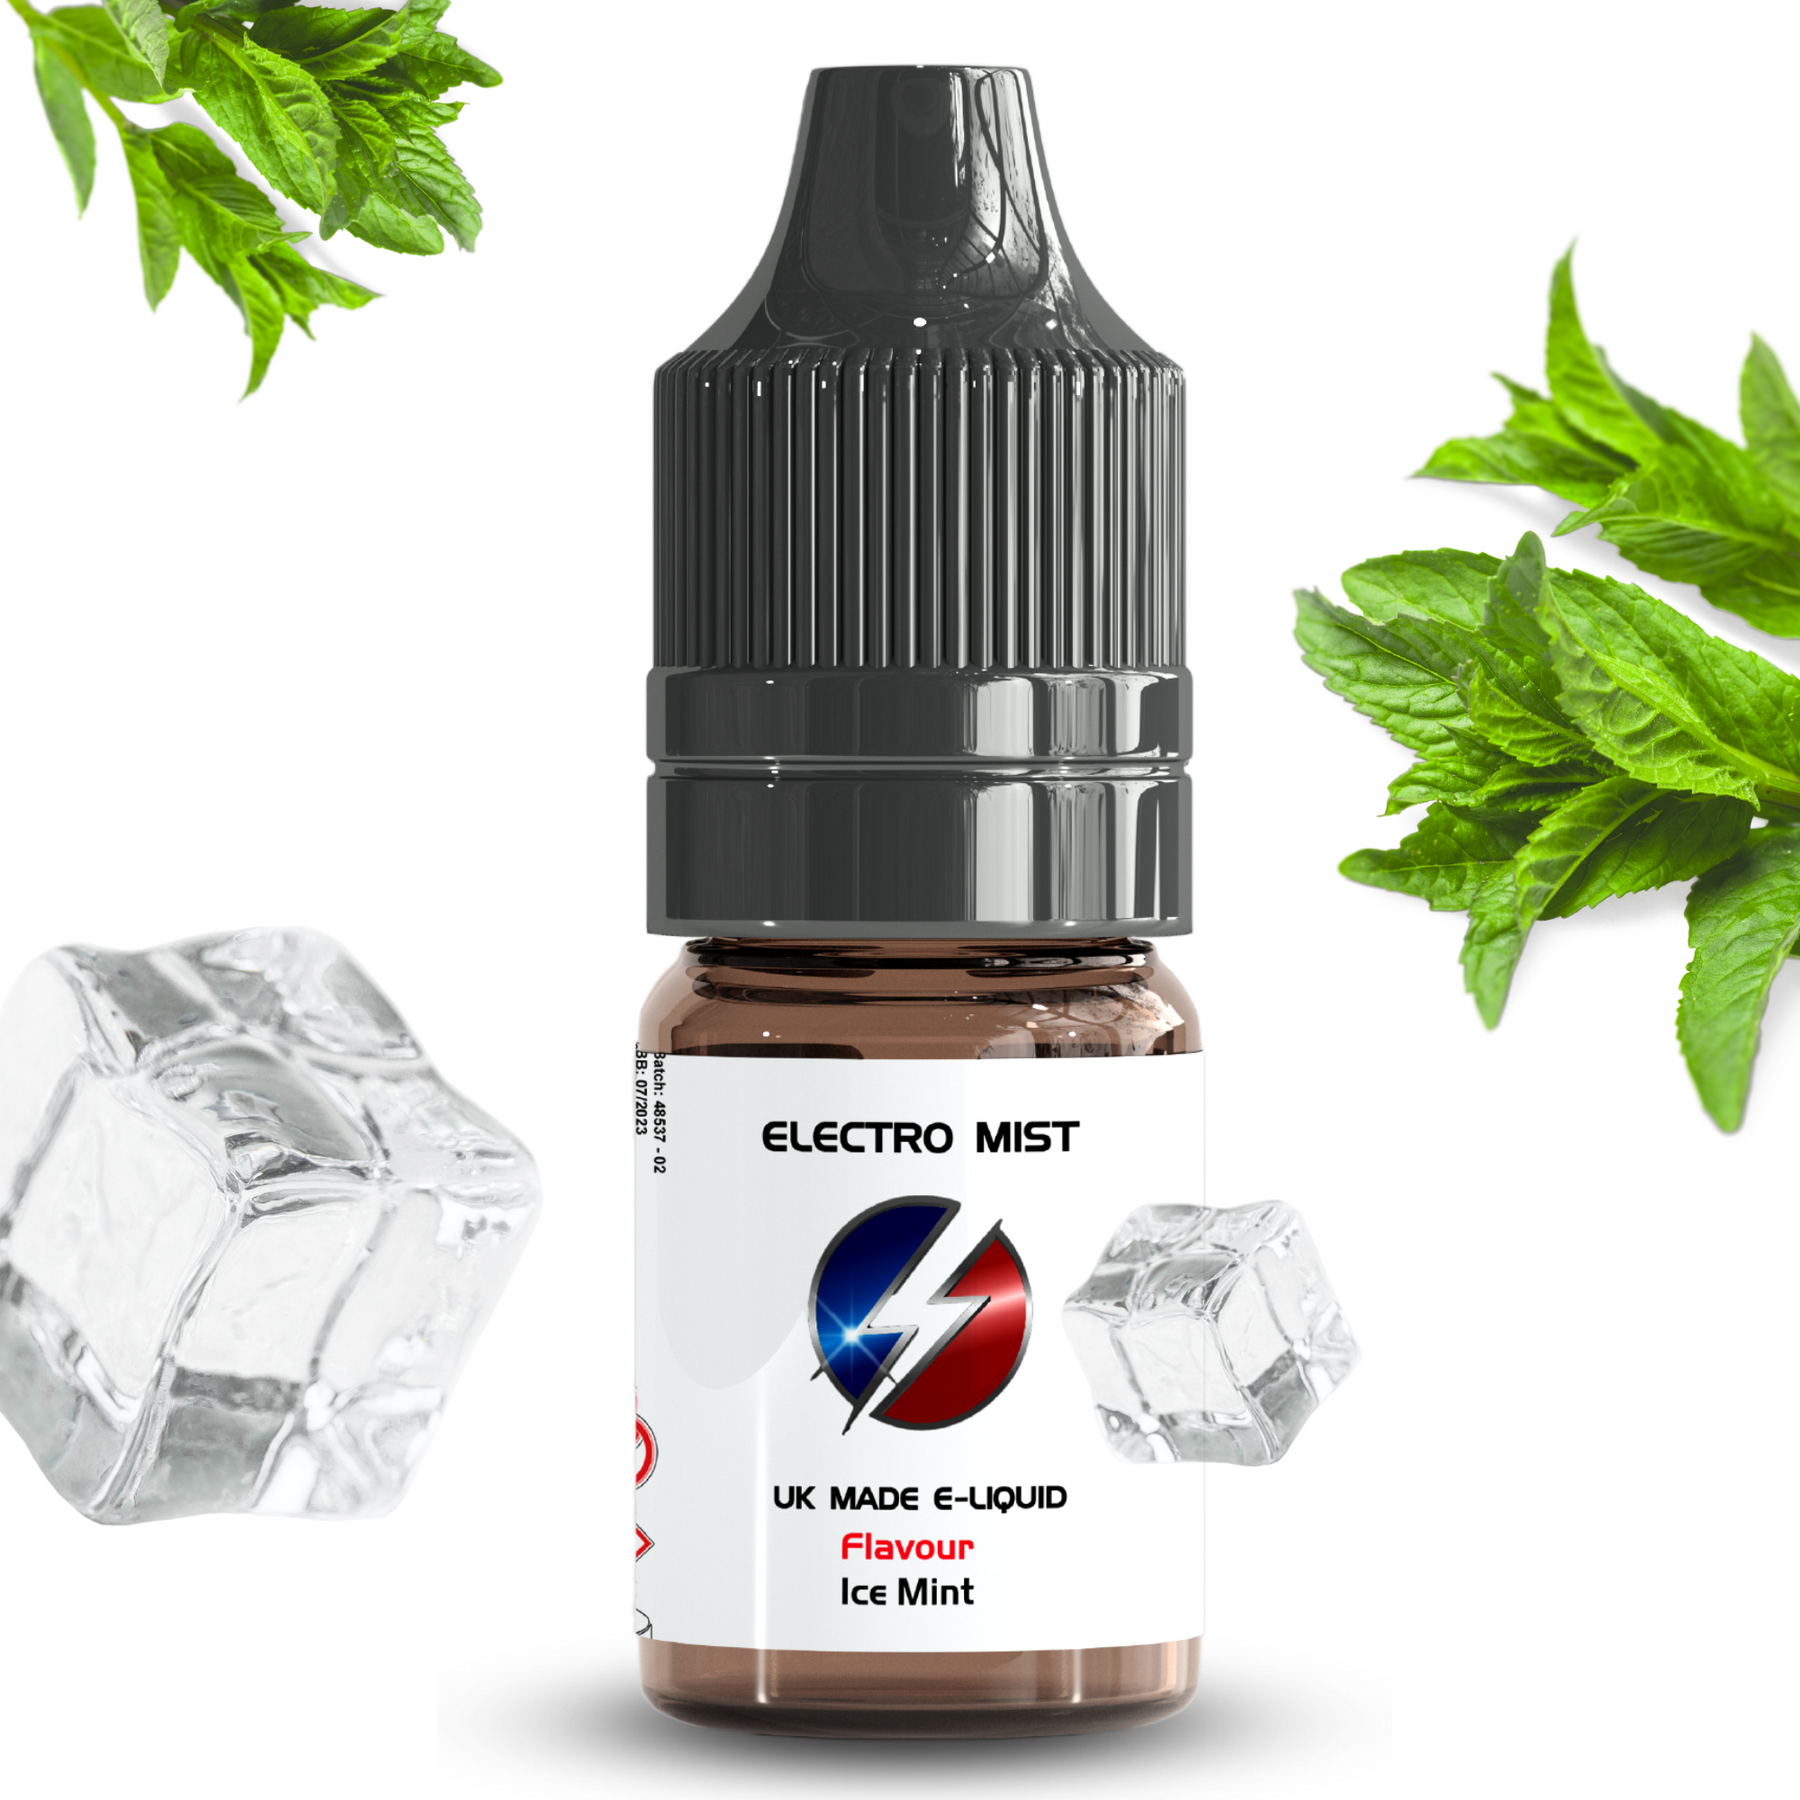 Electromist, the e-liquid brand you can trust. Get your taste buds ready for a flavour sensation, Ice Mint. Nicotine Content: 3mg/6mg/12mg. Products may contain nicotine. For over 18s Only ejuice, vape pen, eliquid, e cigarette, 10ml, vaping, cloud, PG, VG, 60/40, vape liquid, Flavour